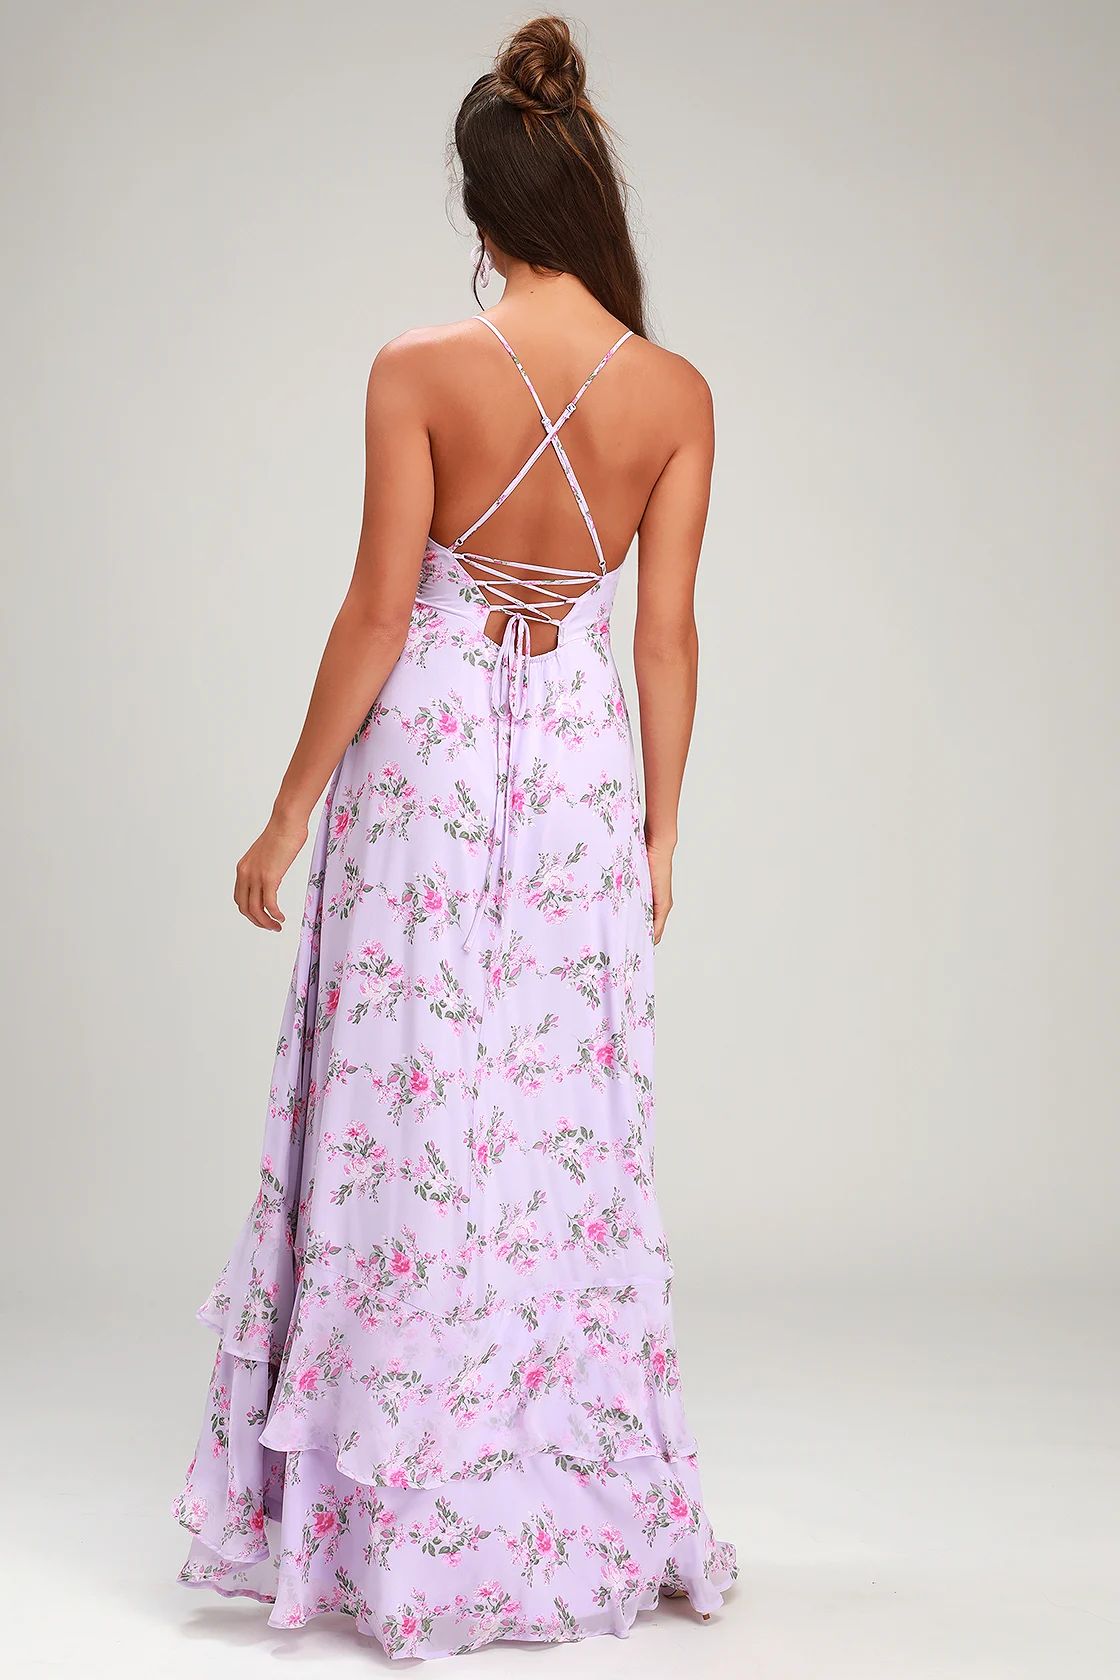 In Love Forever Lavender Floral Lace-Up High-Low Maxi Dress | Lulus (US)